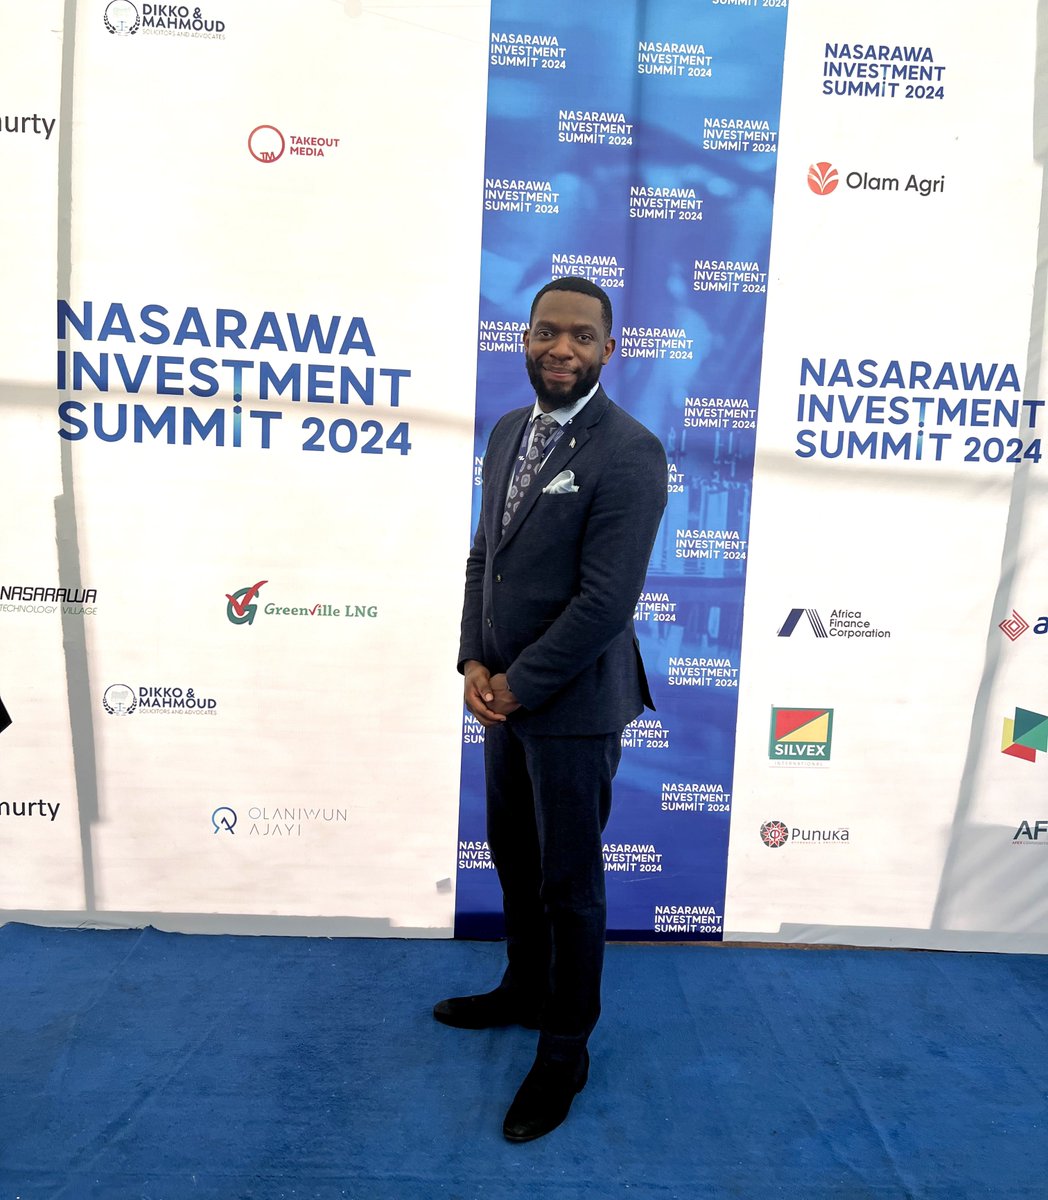 Dr Dipo Awojide, a fine boy Management Consultant (Strategy, Process & Operational Improvement) by day and Human Capital Strategist (Education, Skills Training & MSME Development) by night. An original Yoruba Angel. Saying hi 👋🏼 from Lafia, Nasarawa State ❤️ #NIS2024